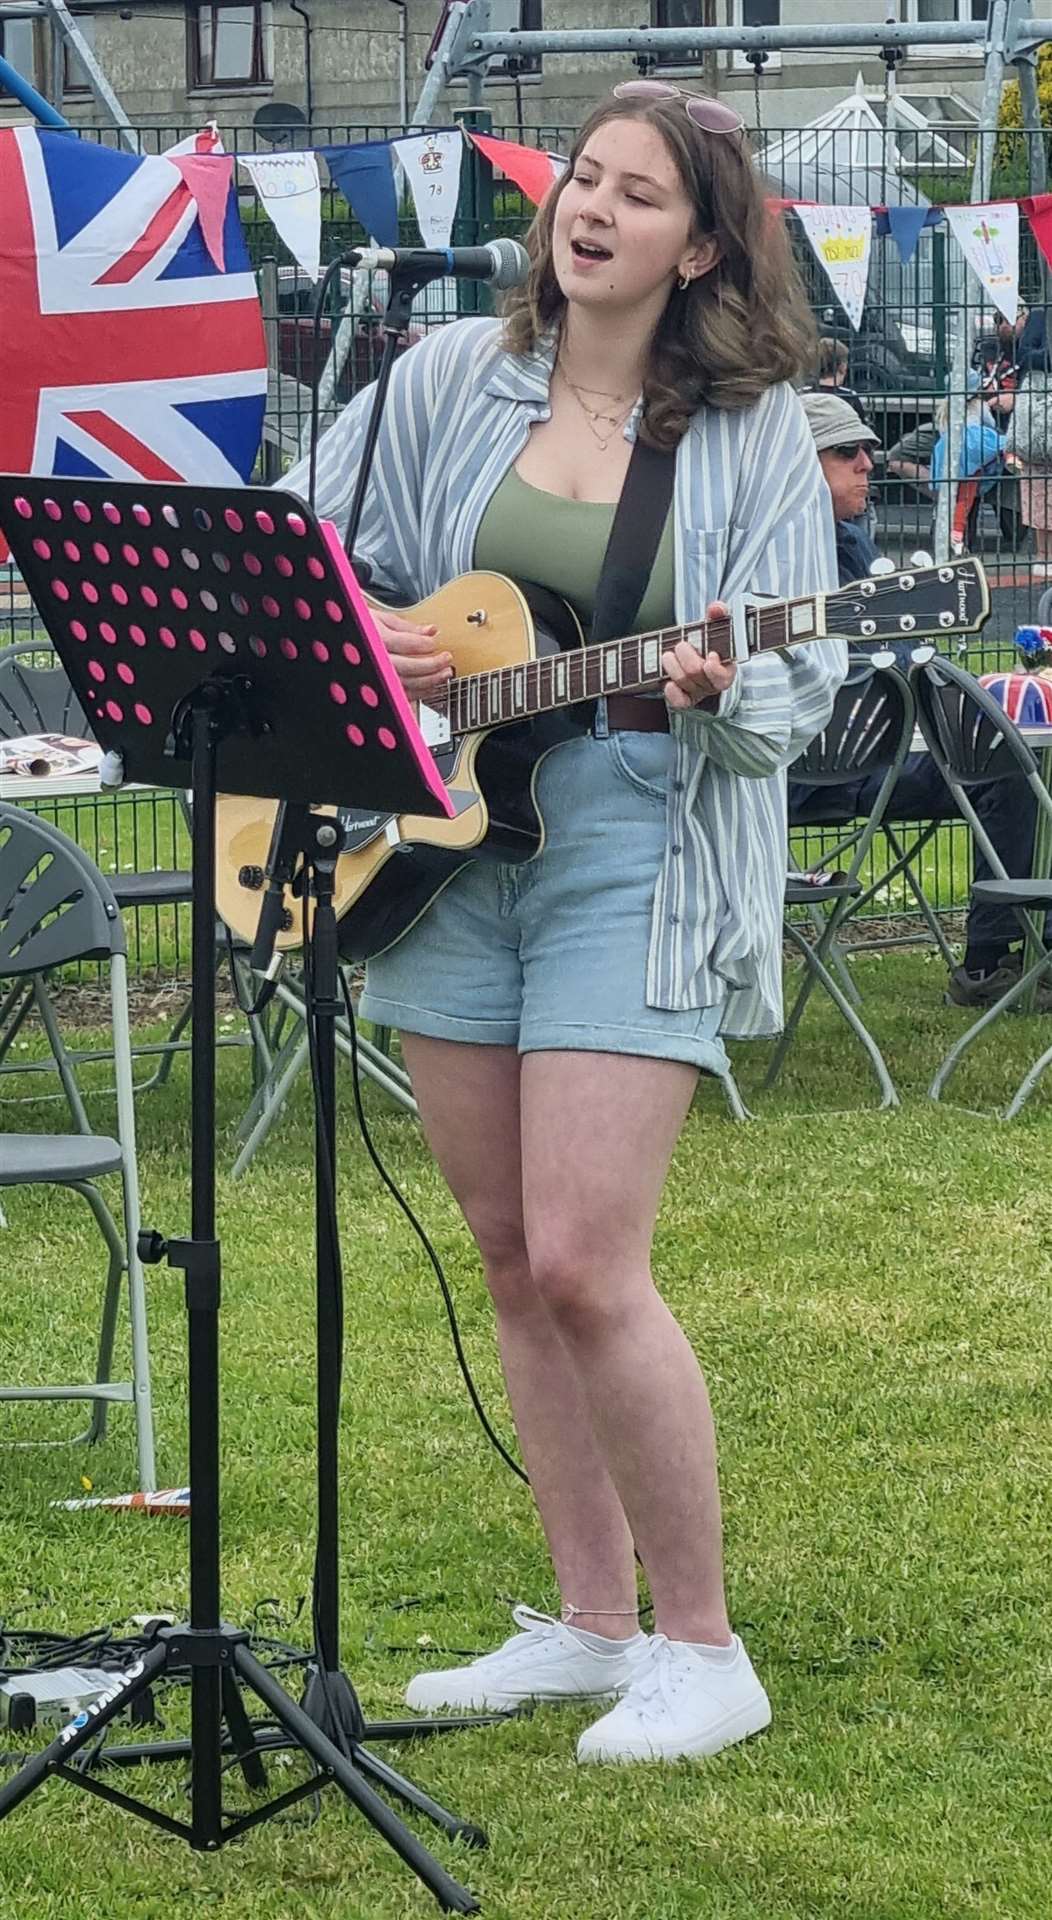 Fern Strachan playing at the Castletown jubilee party on Saturday.